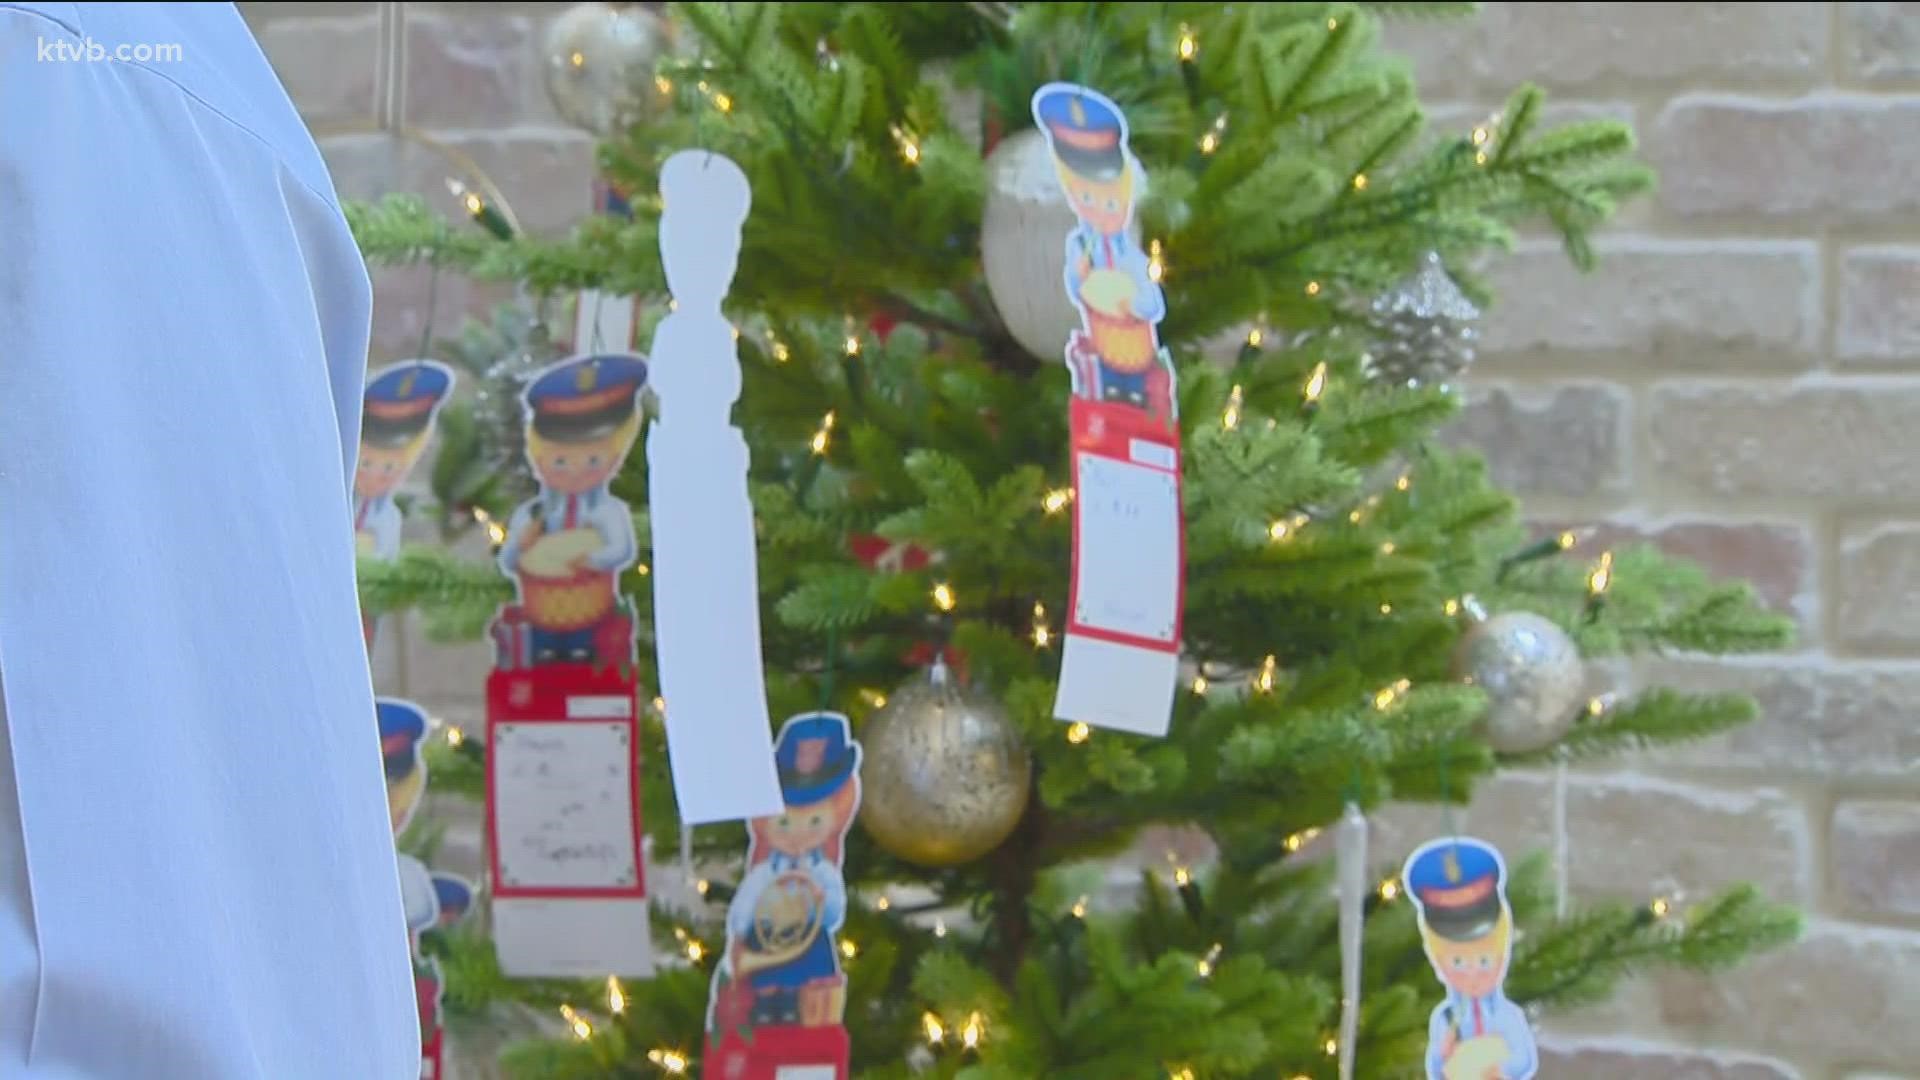 The Angel Tree is one way to help fulfill Christmas wishes -- and meet basic needs. "The littlest thing is a blessing" for struggling families.